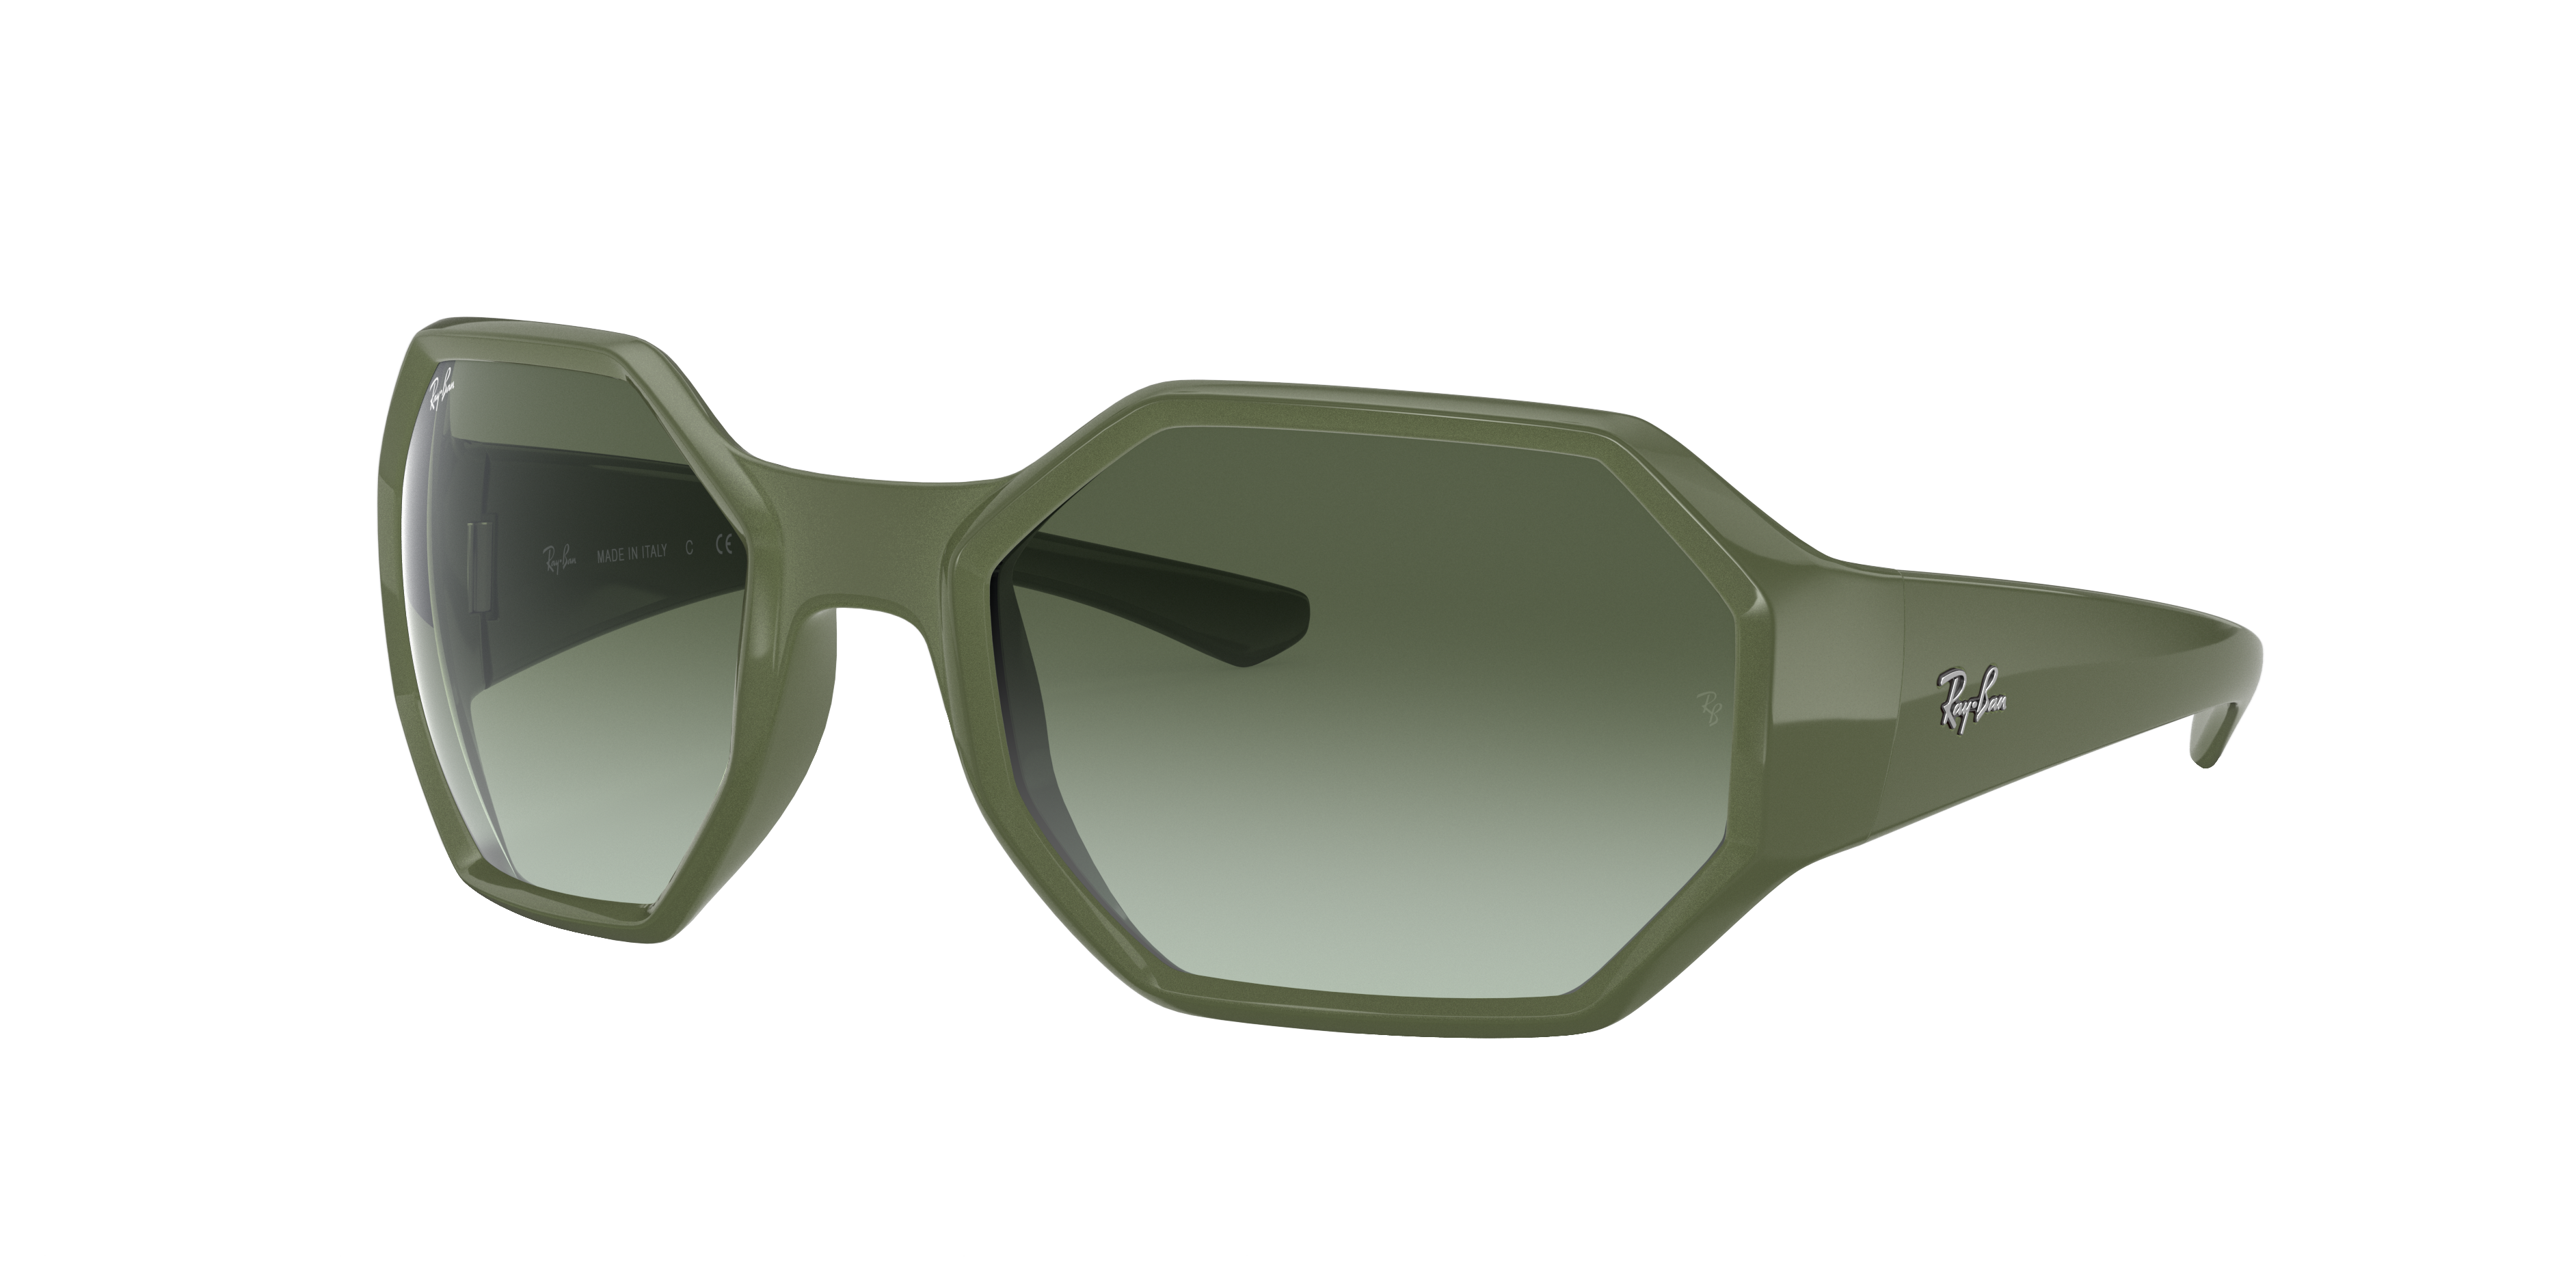 Rb4337 Sunglasses in Military Green and Green | Ray-Ban®